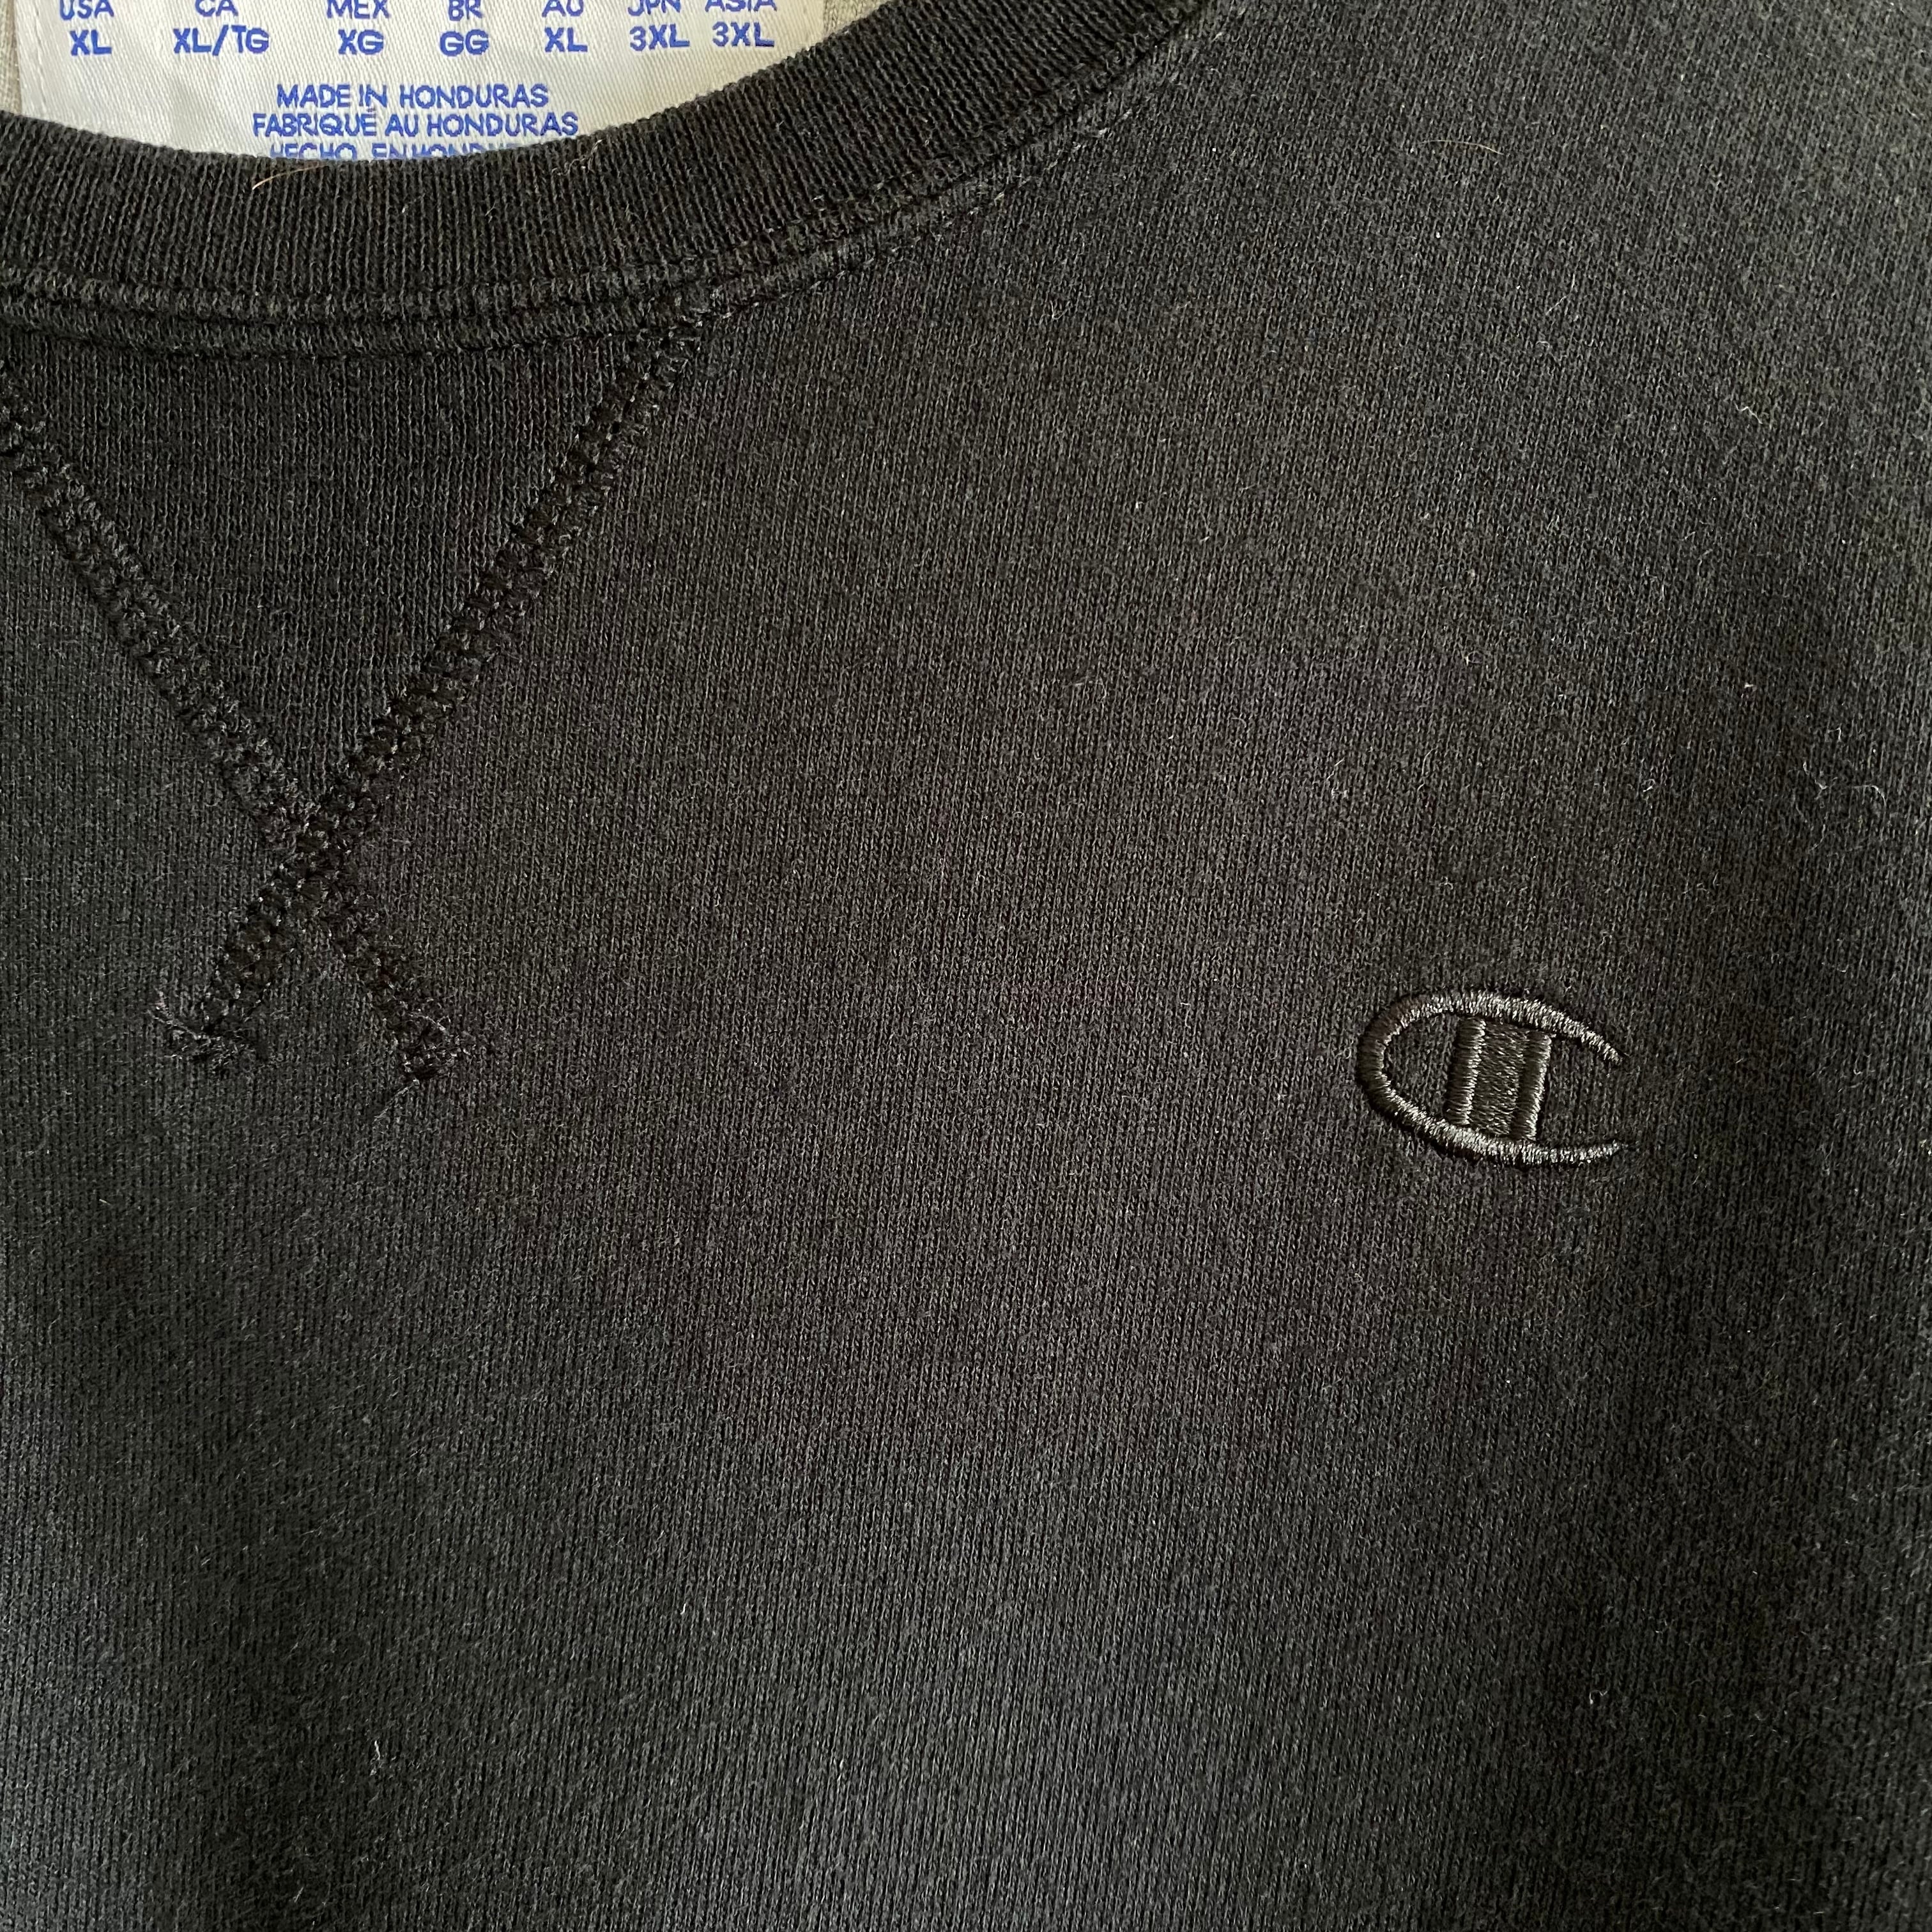 Hanes Champion reverse weave one point sweat shirt made in